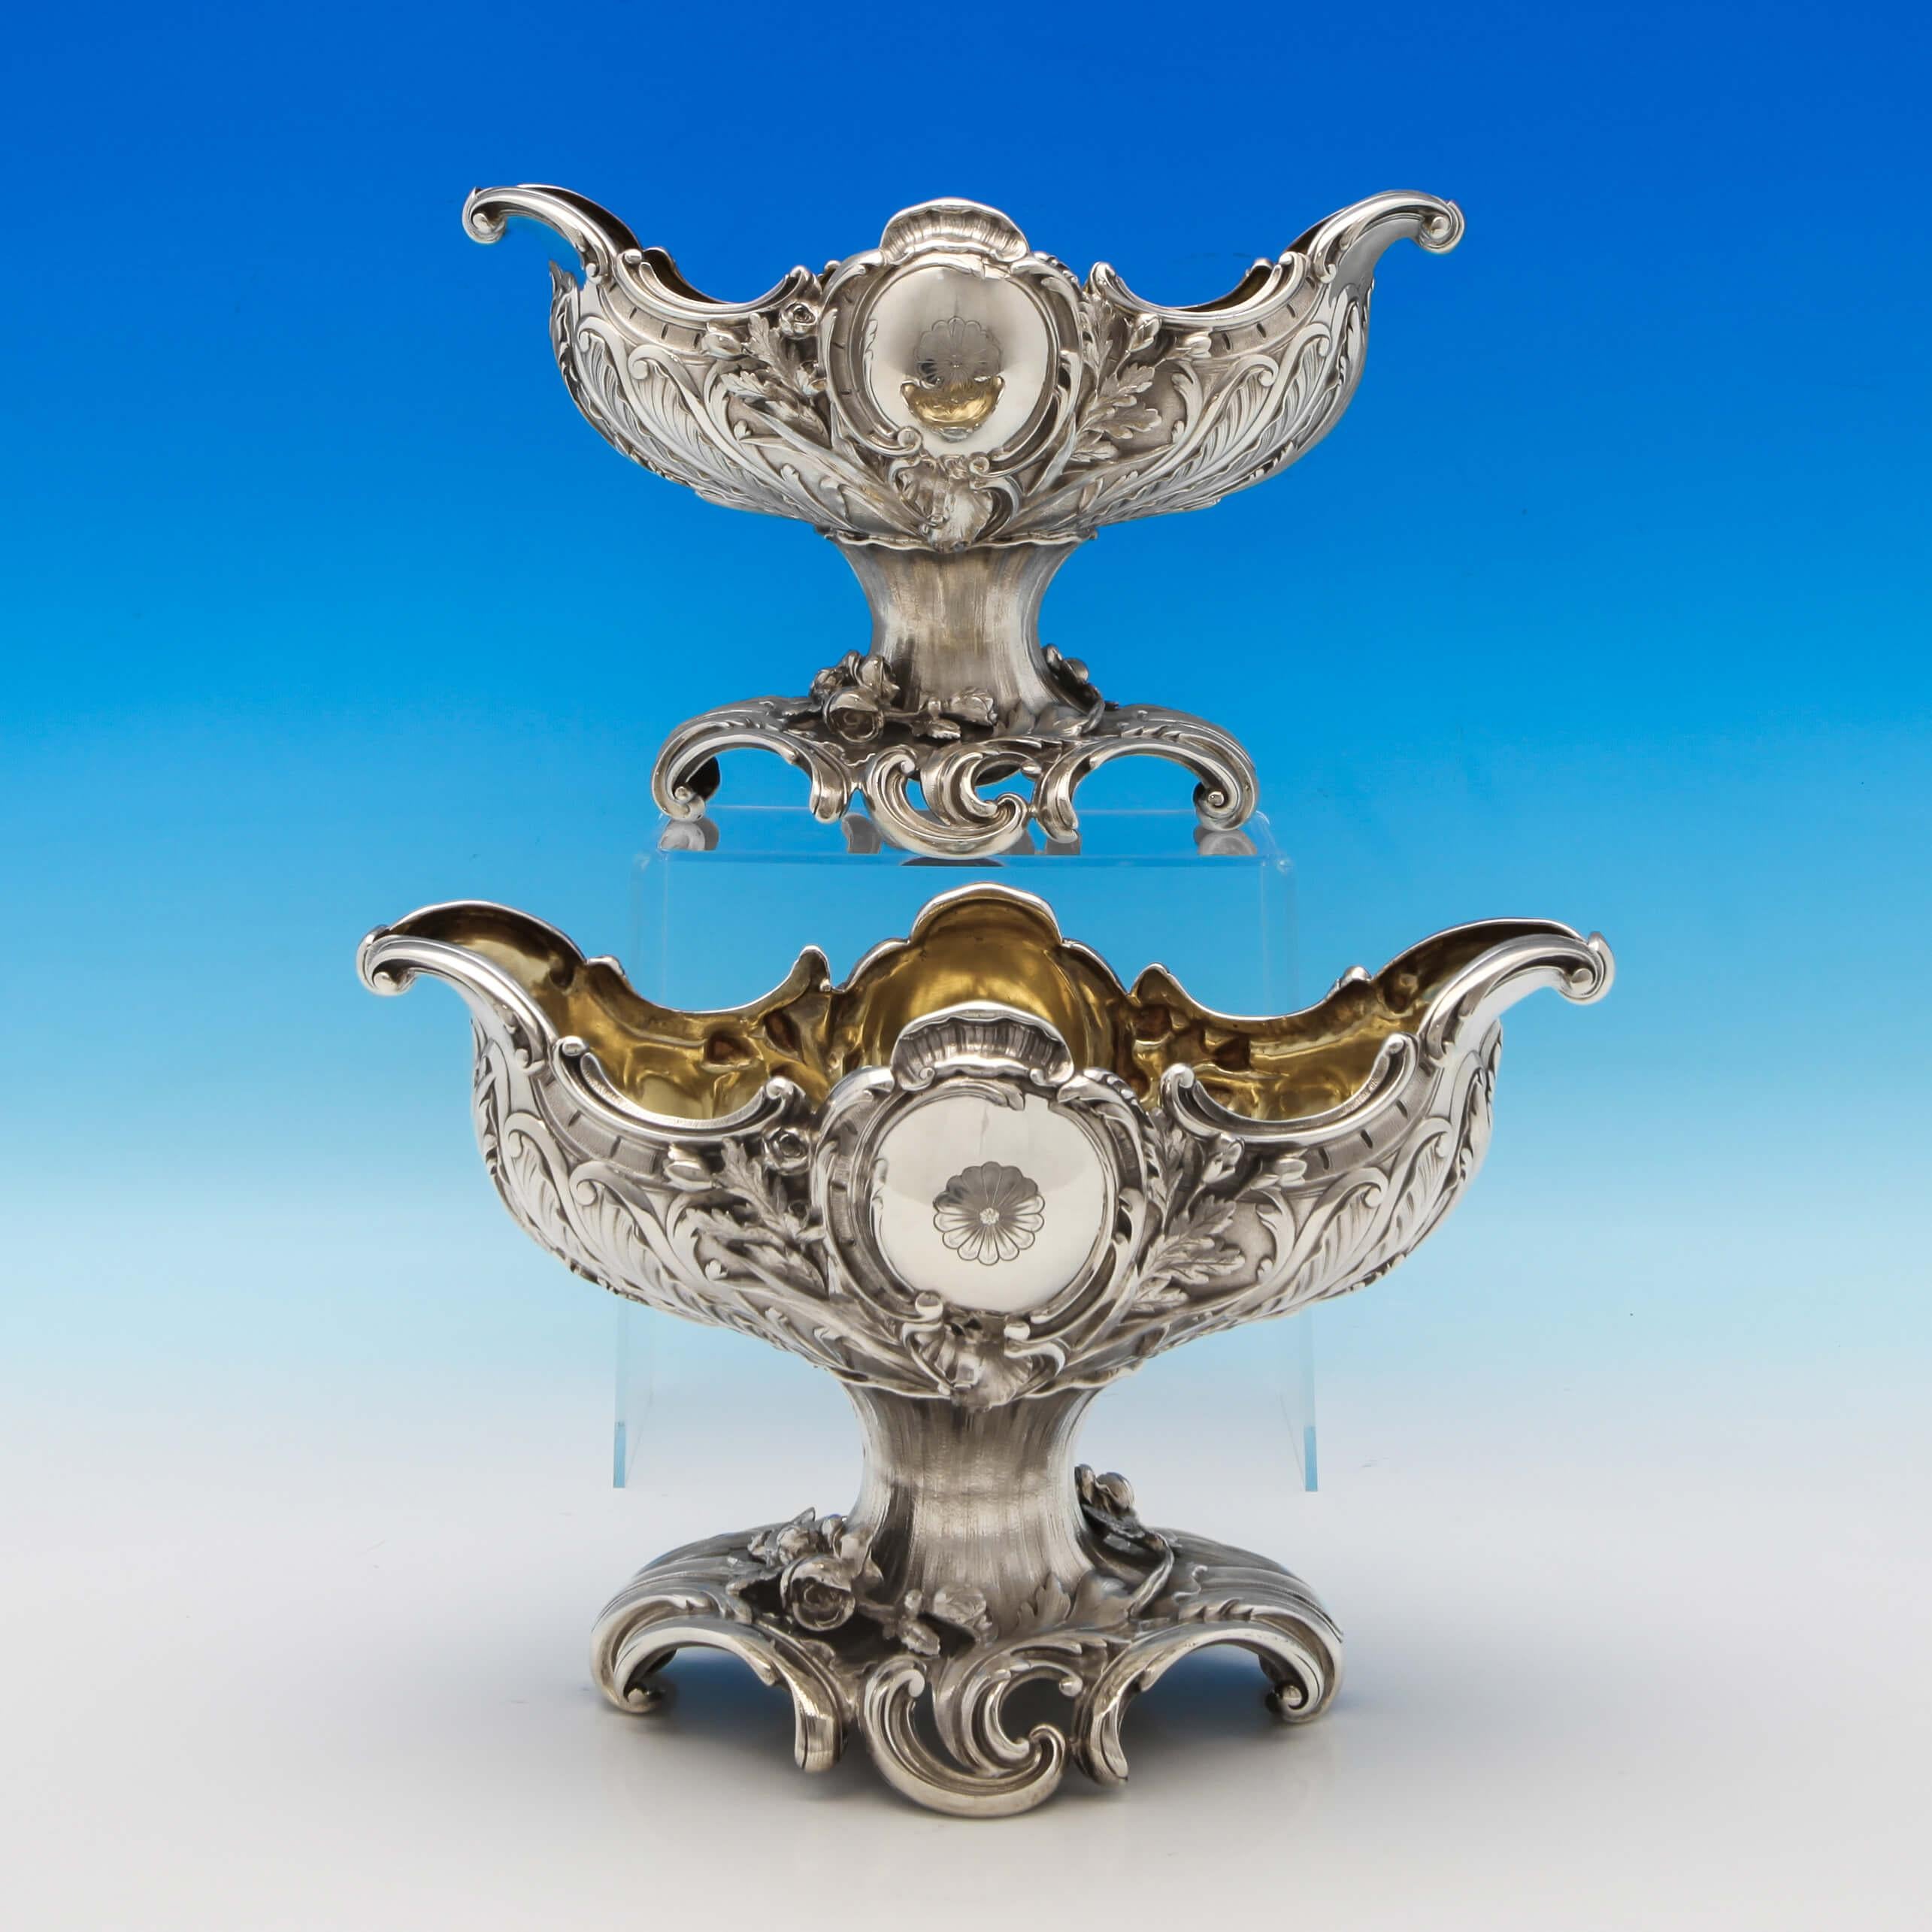 Hallmarked in Birmingham in 1898/9 by Elkington & Co., this fantastic quality, pair of Victorian, antique, sterling silver bowls, are oval in shape, featuring ornate chased decoration to the bodies and feet, gilt interiors, and an engraved crest to